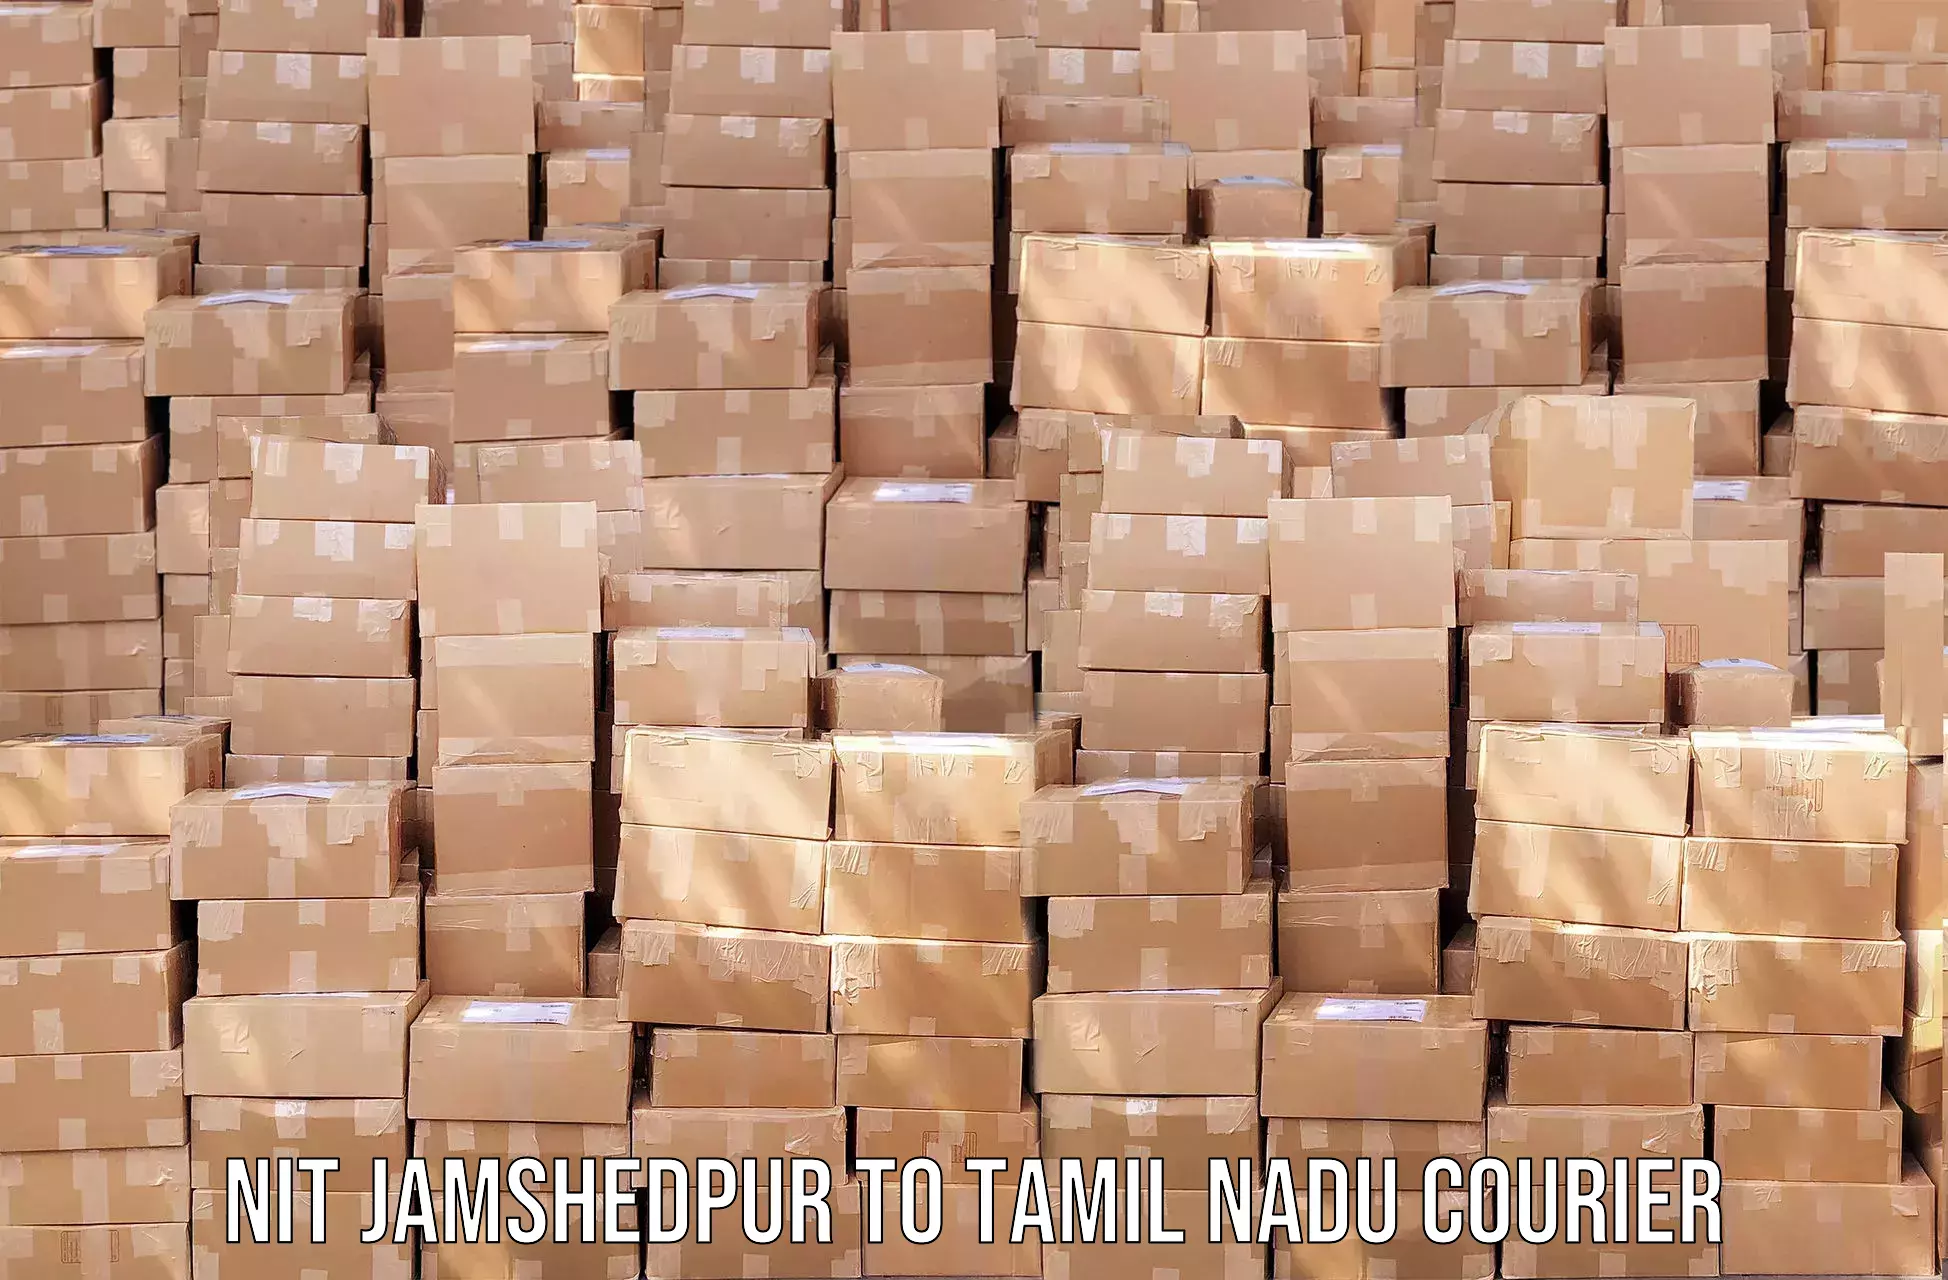 Next-day delivery options NIT Jamshedpur to Chennai Port